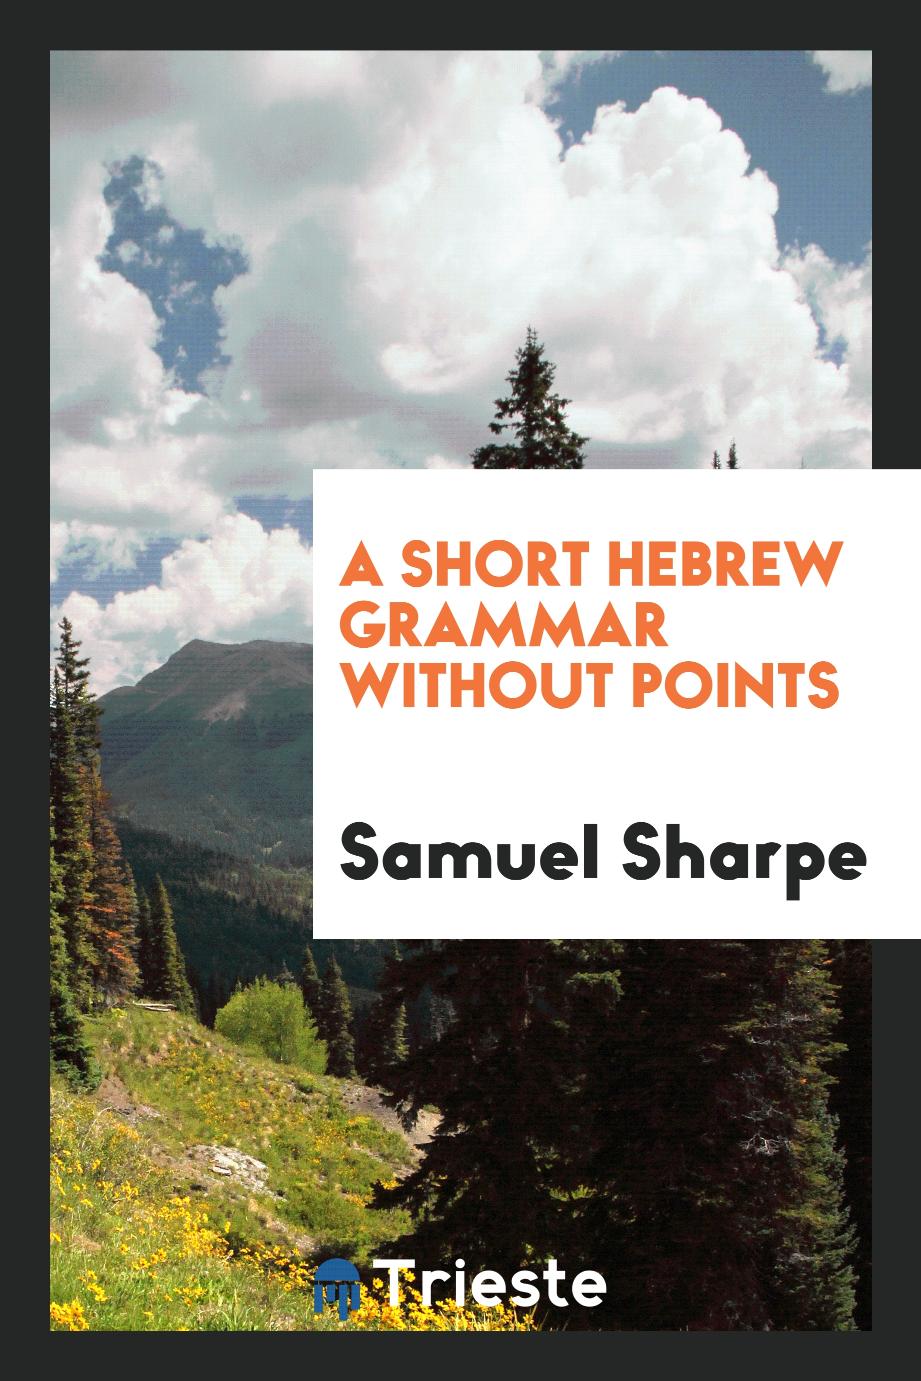 A Short Hebrew Grammar Without Points